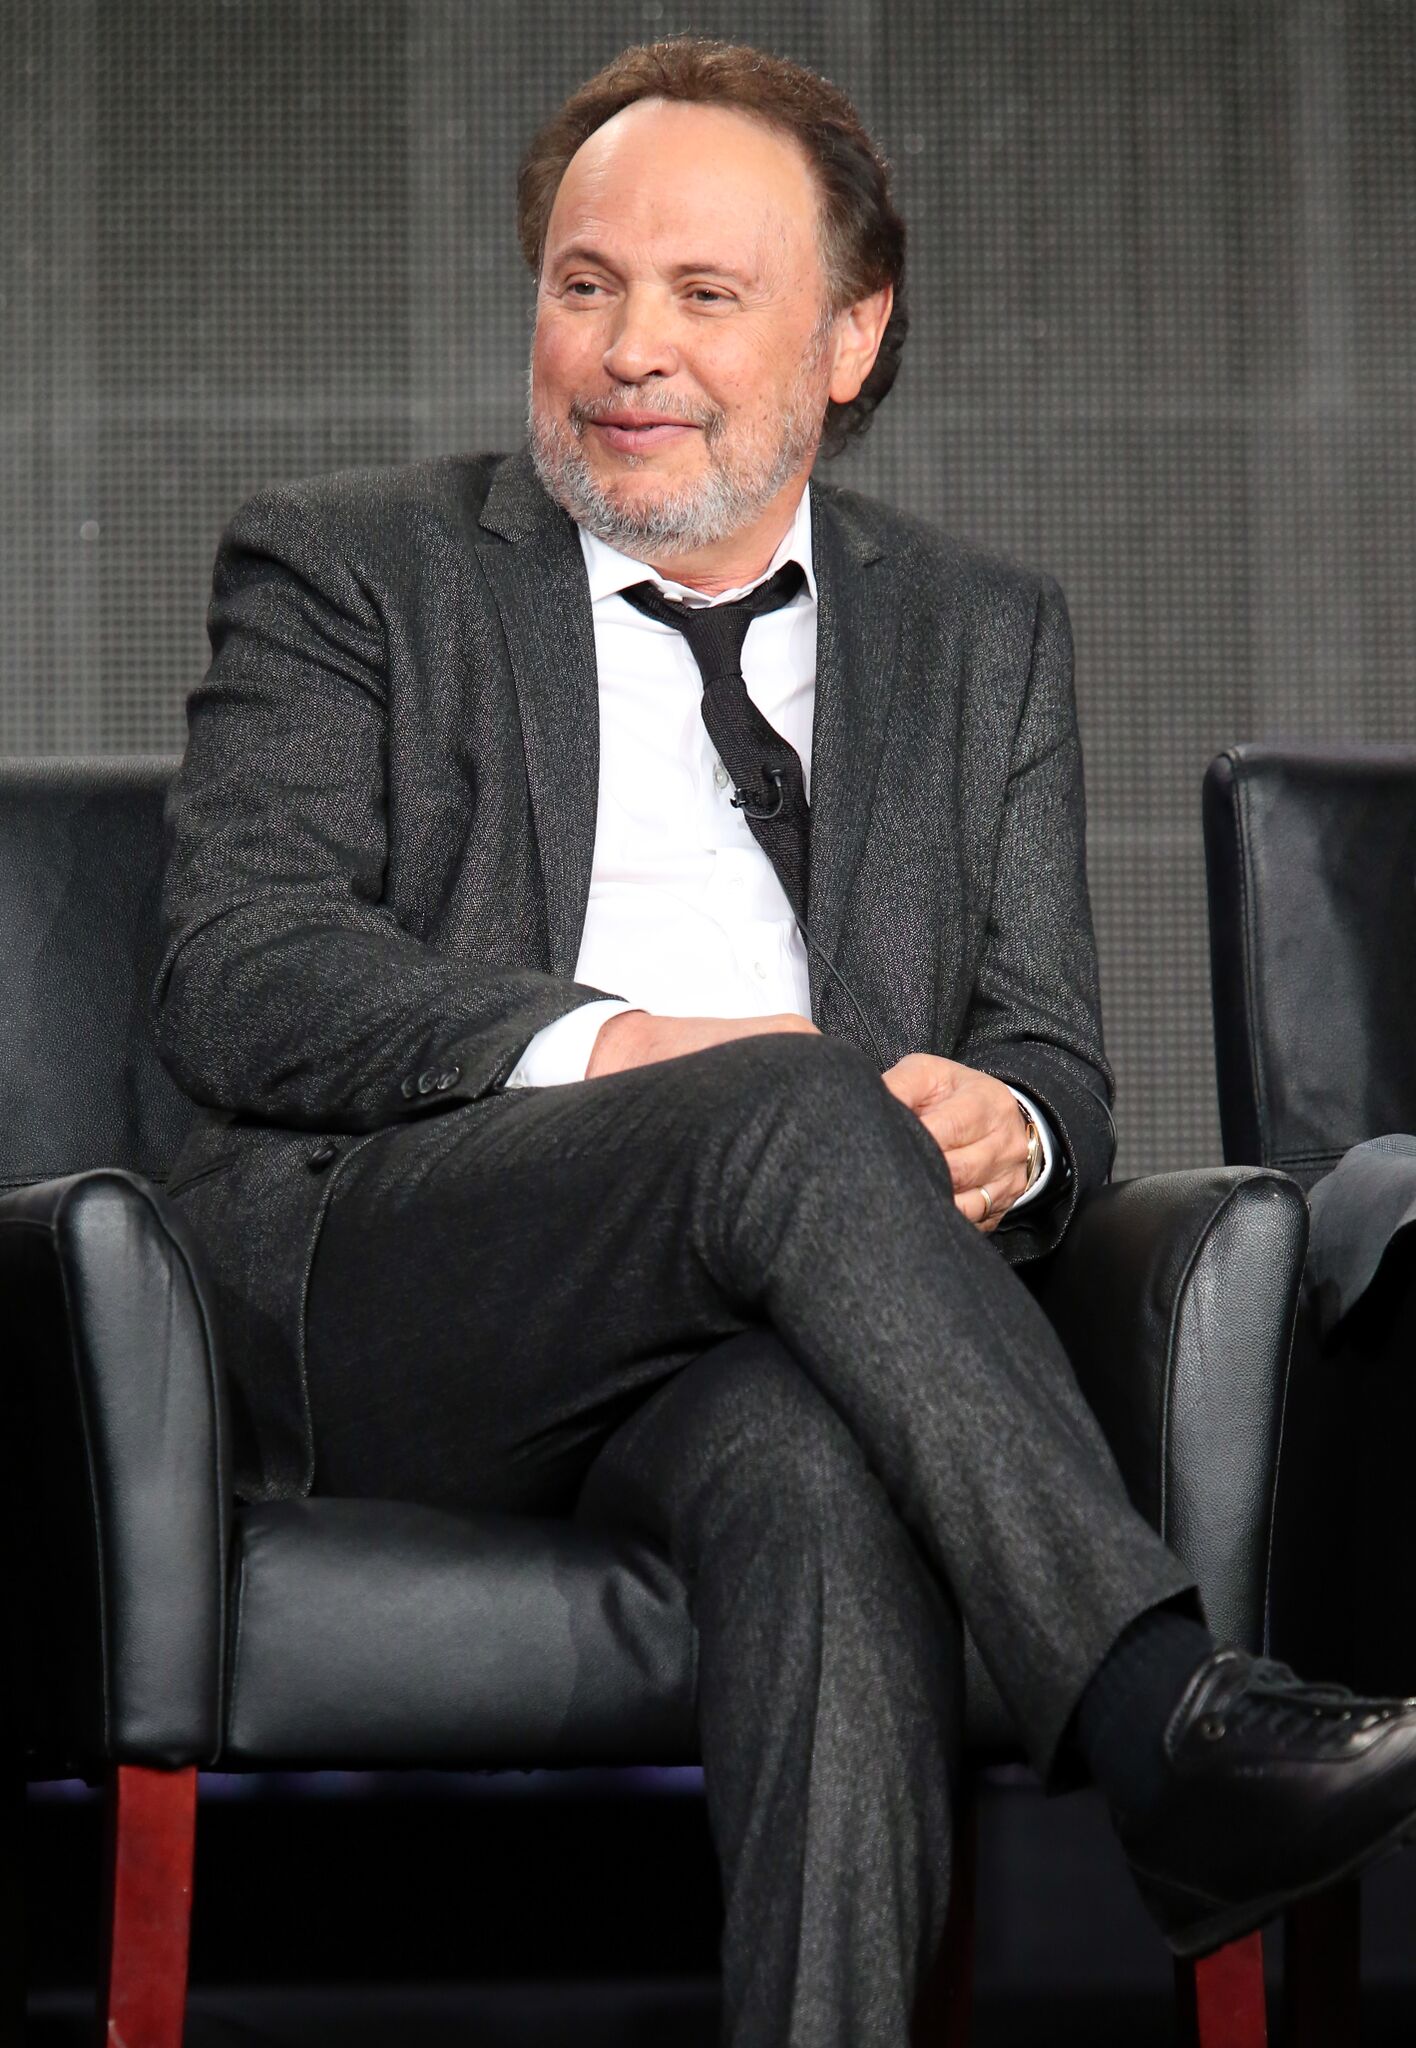  Executive producer/writer/actor Billy Crystal speaks onstage during the 'The Comedians' panel discussion at the FX Networks portion of the Television Critics Association press tour | Getty Images 